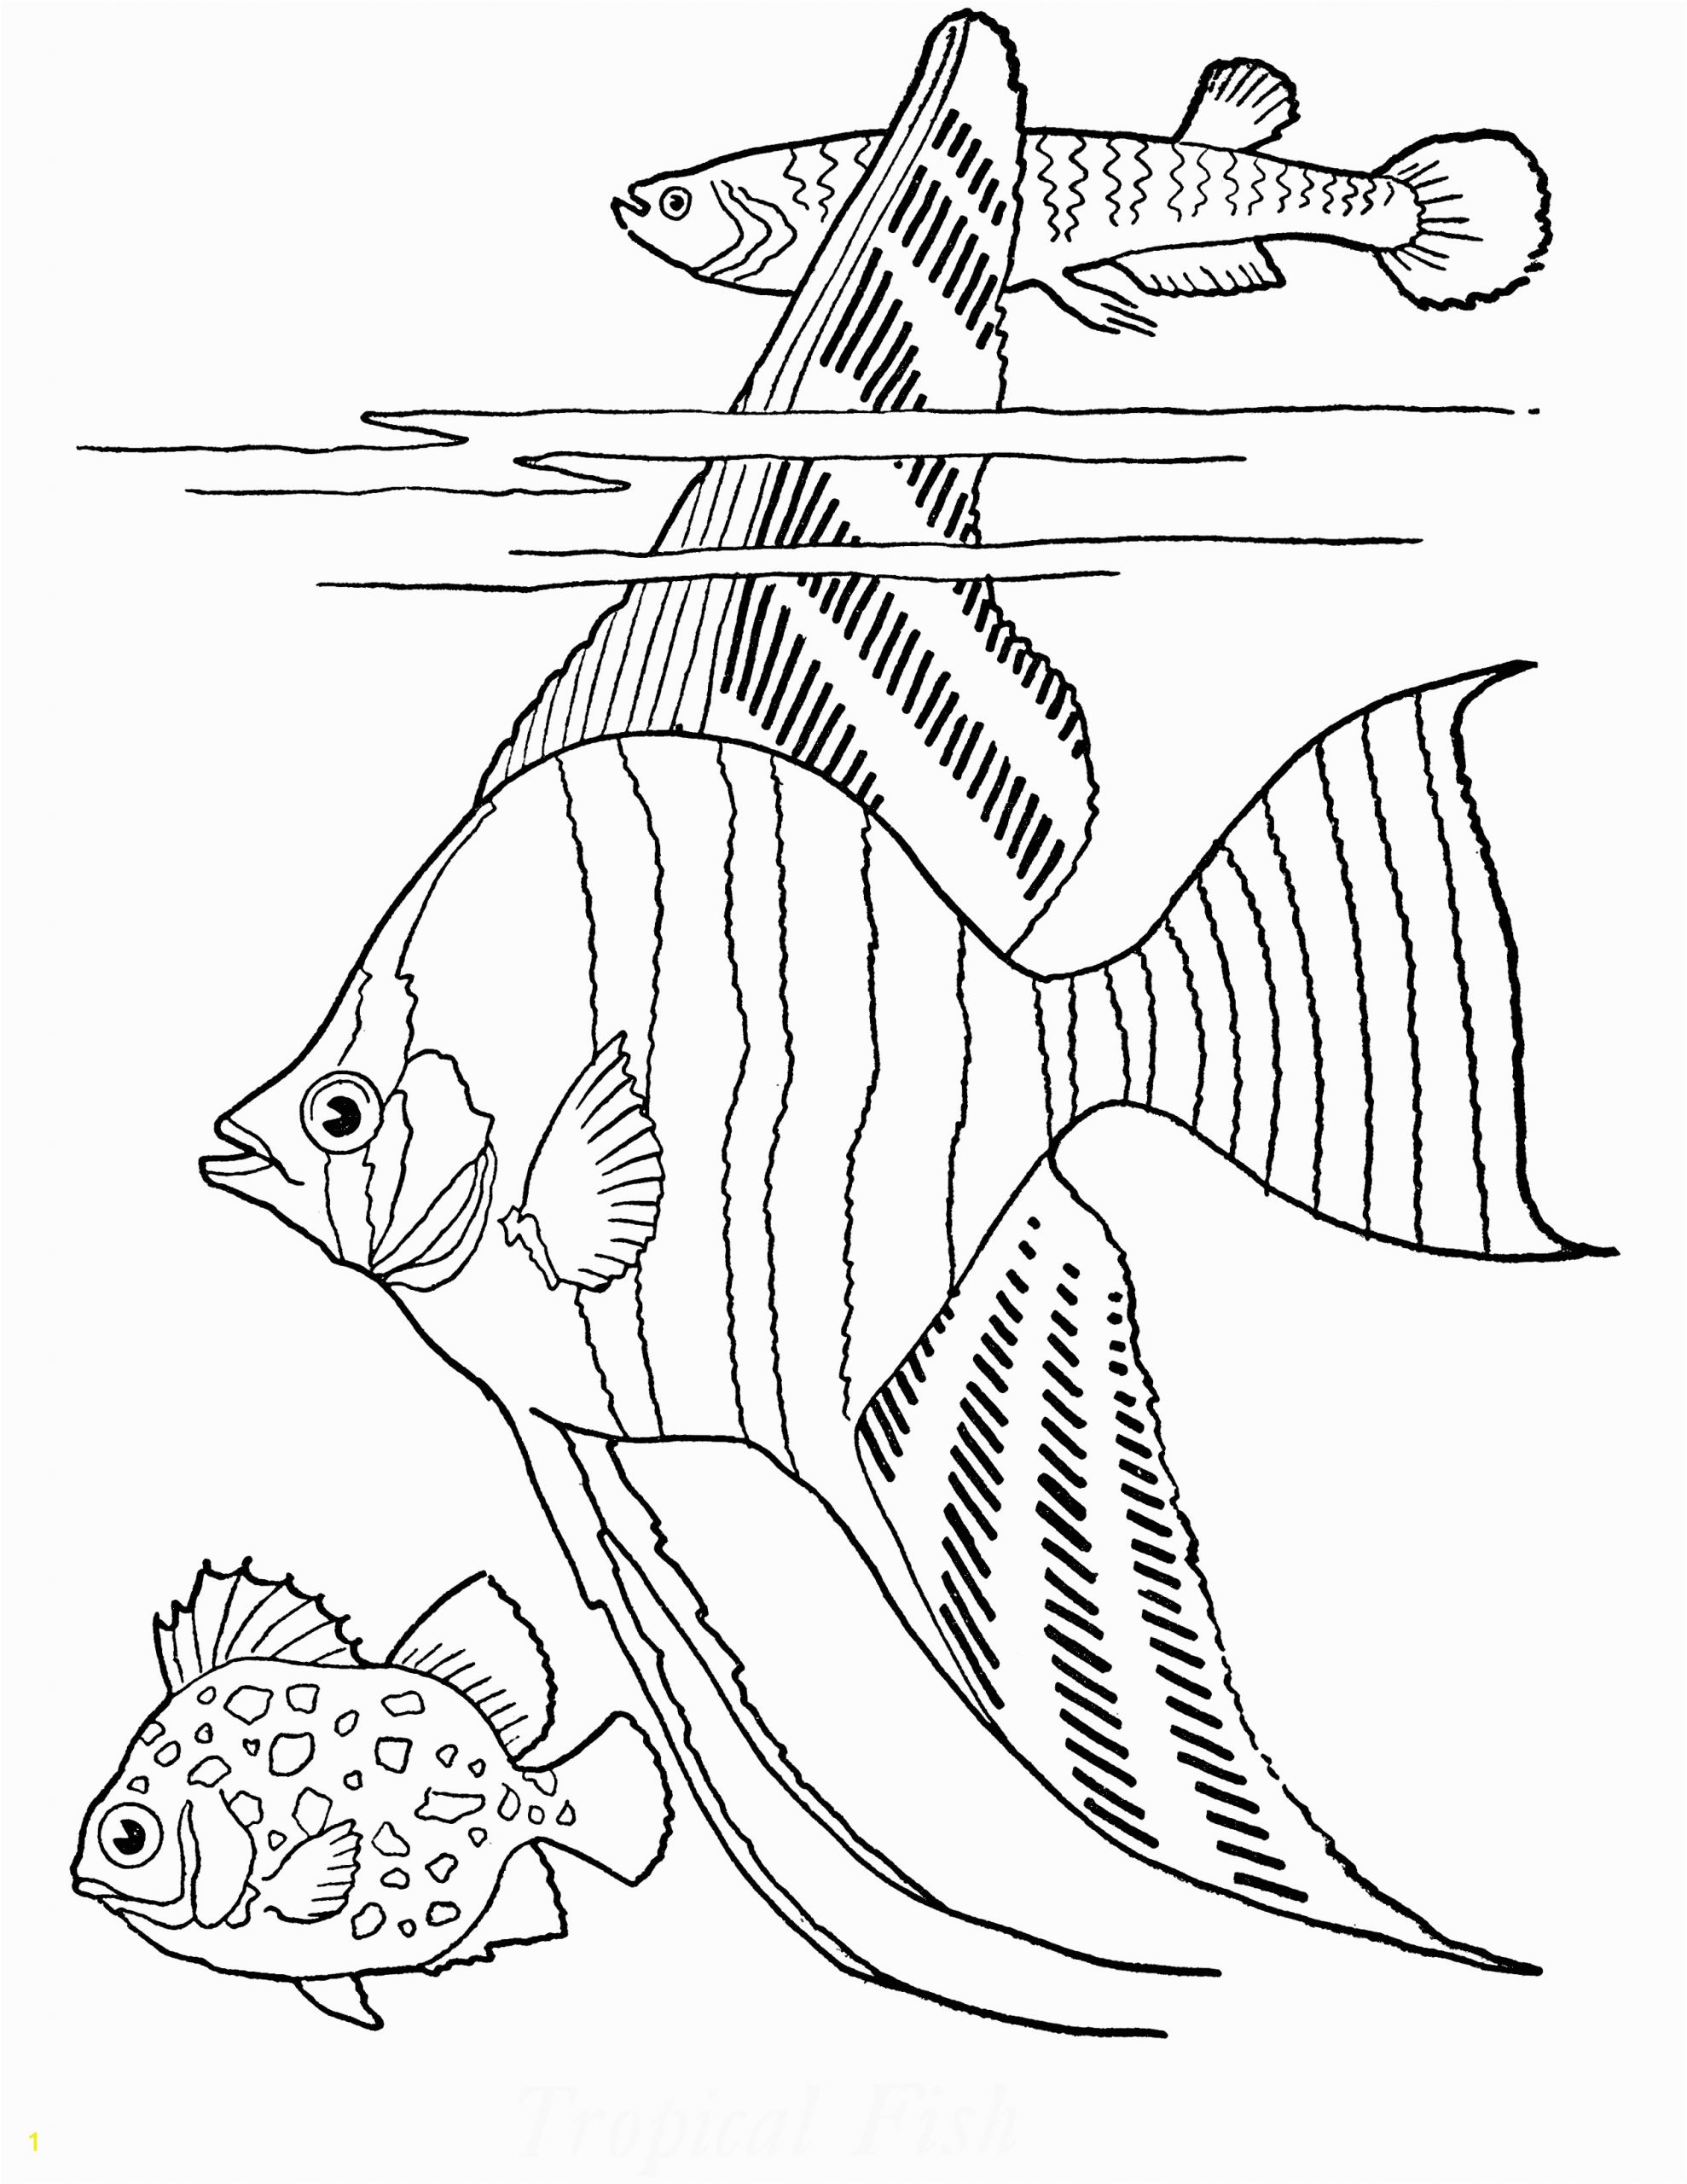 freeintable adult coloring page tropical fish the pages toint out for image inspirations graphicsfairy